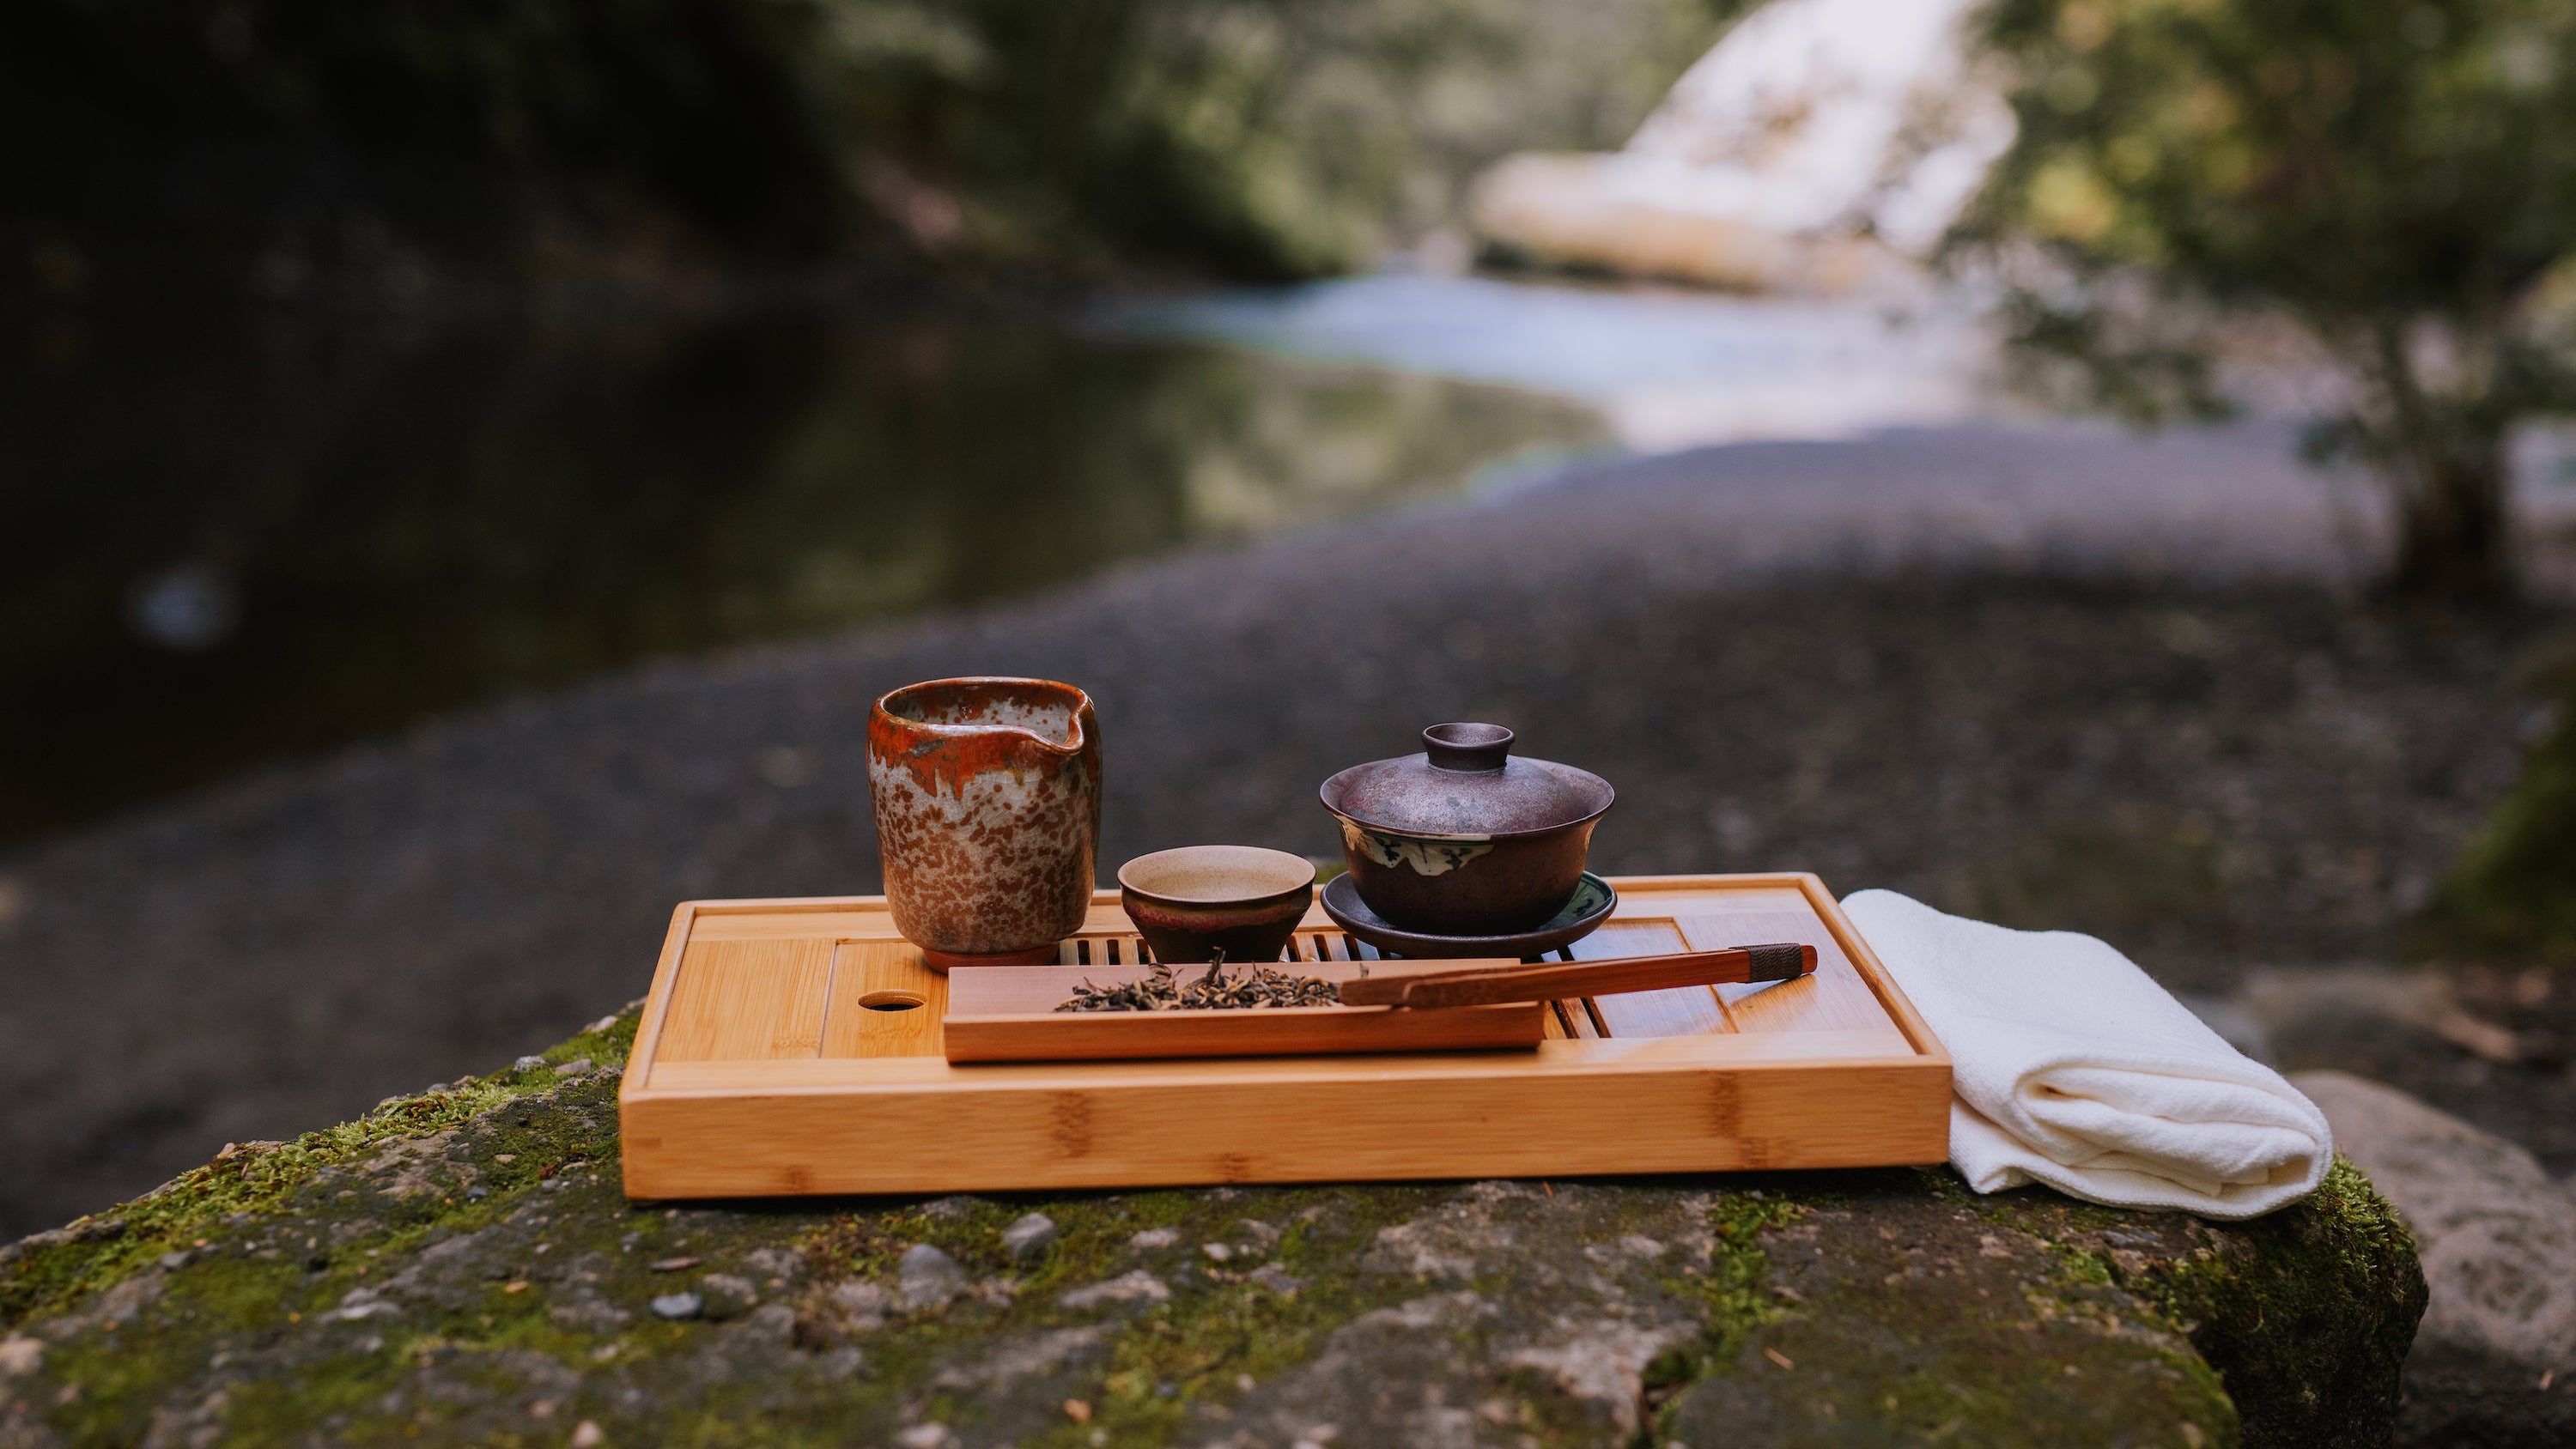 teaboat resting on a rock with geyser spring in the background and holding a gaiwan, pitcher, small cup and black tea